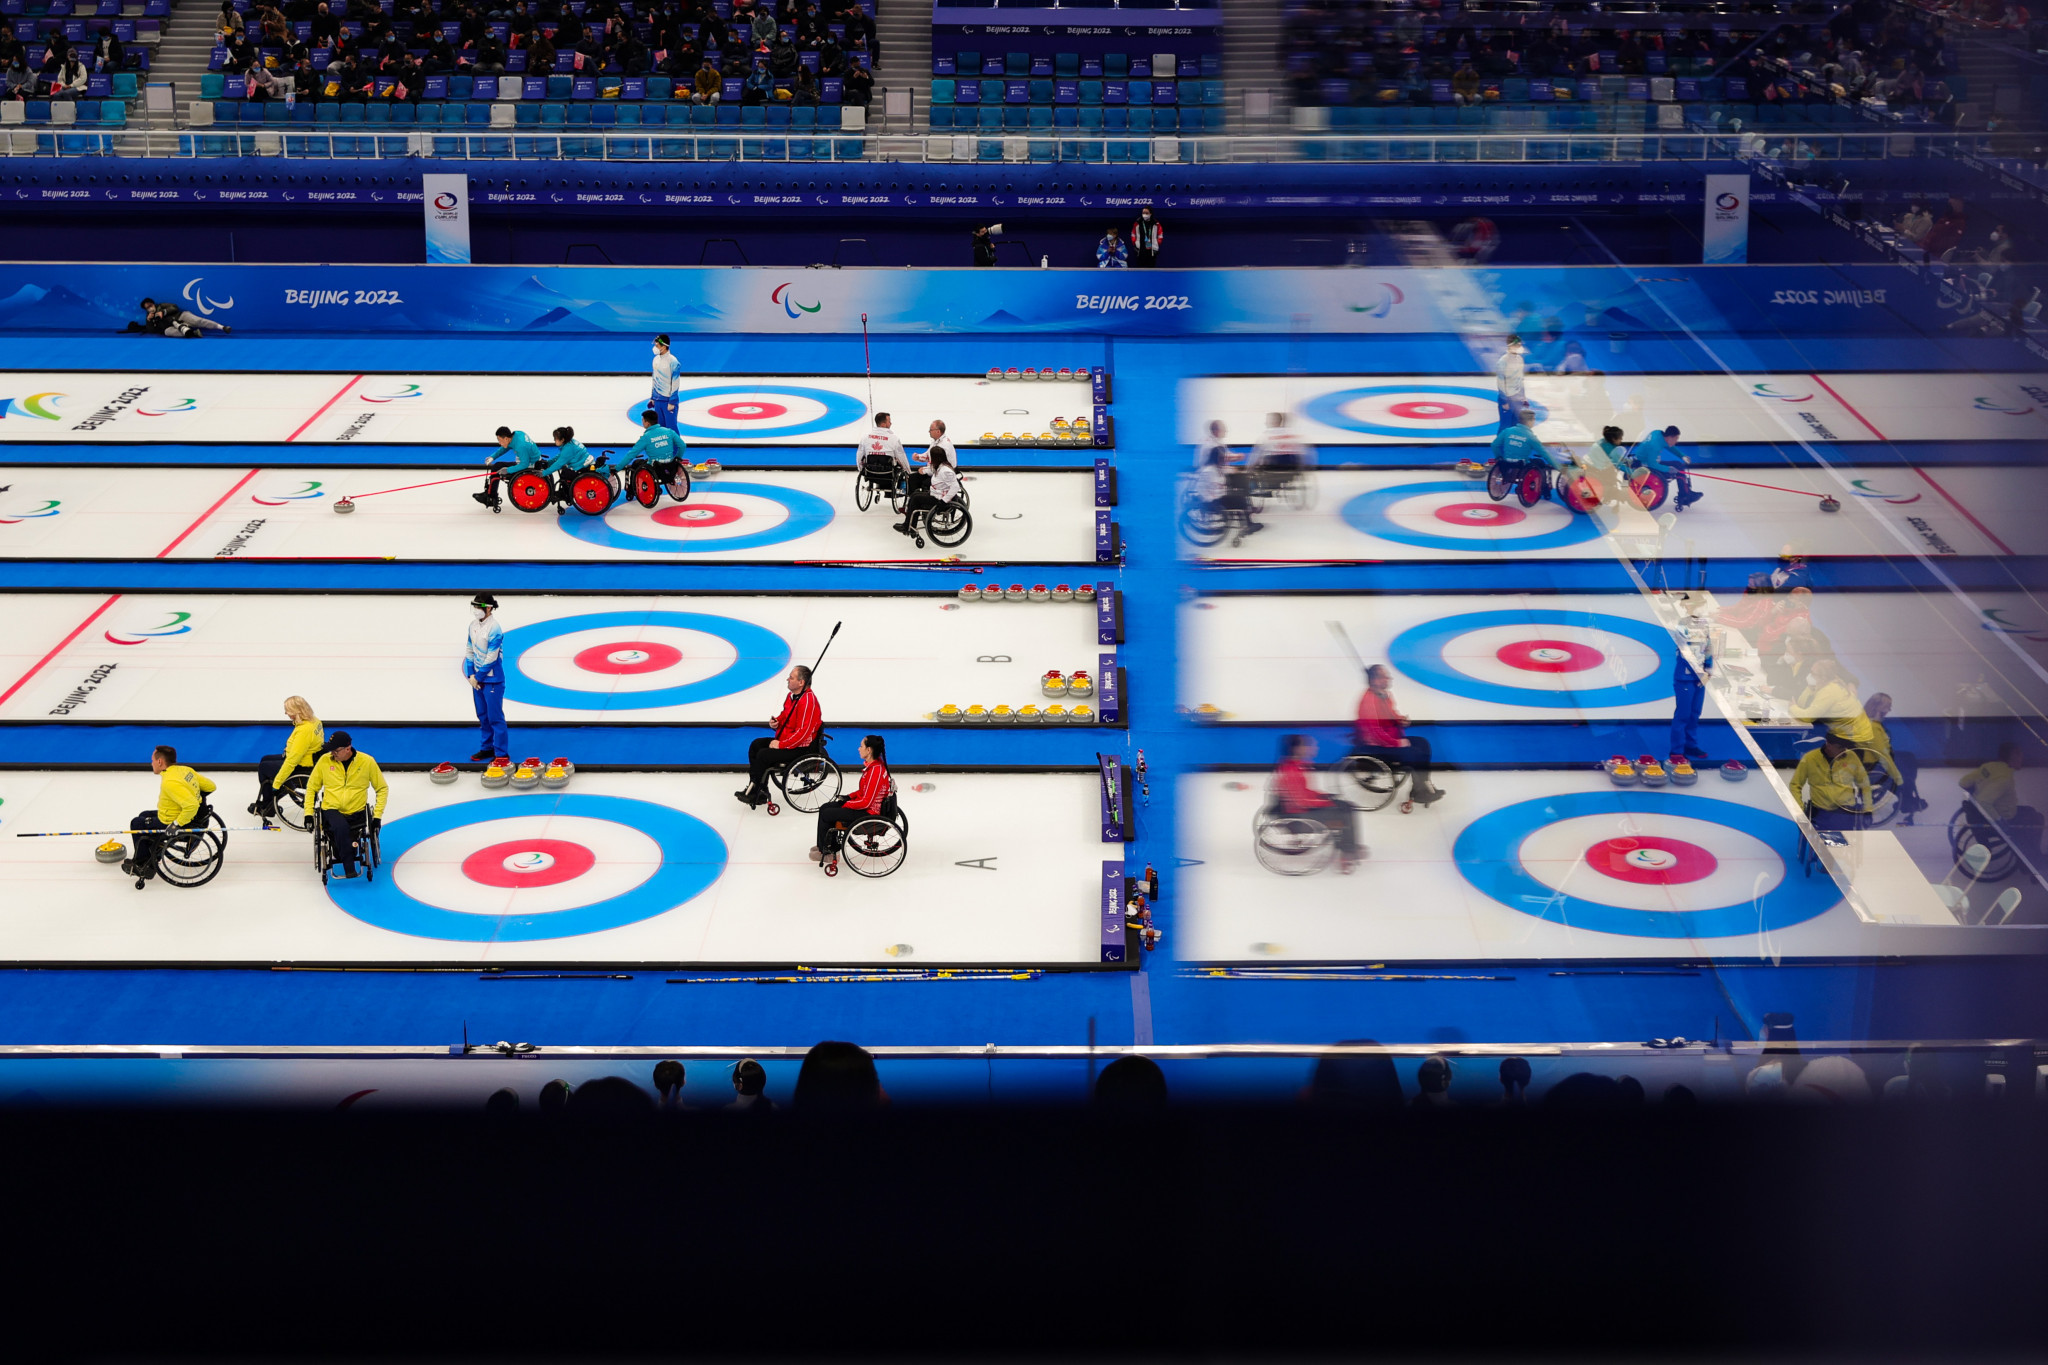 Building more curling facilities is part of Beau Welling's campaign agenda ©Getty Images